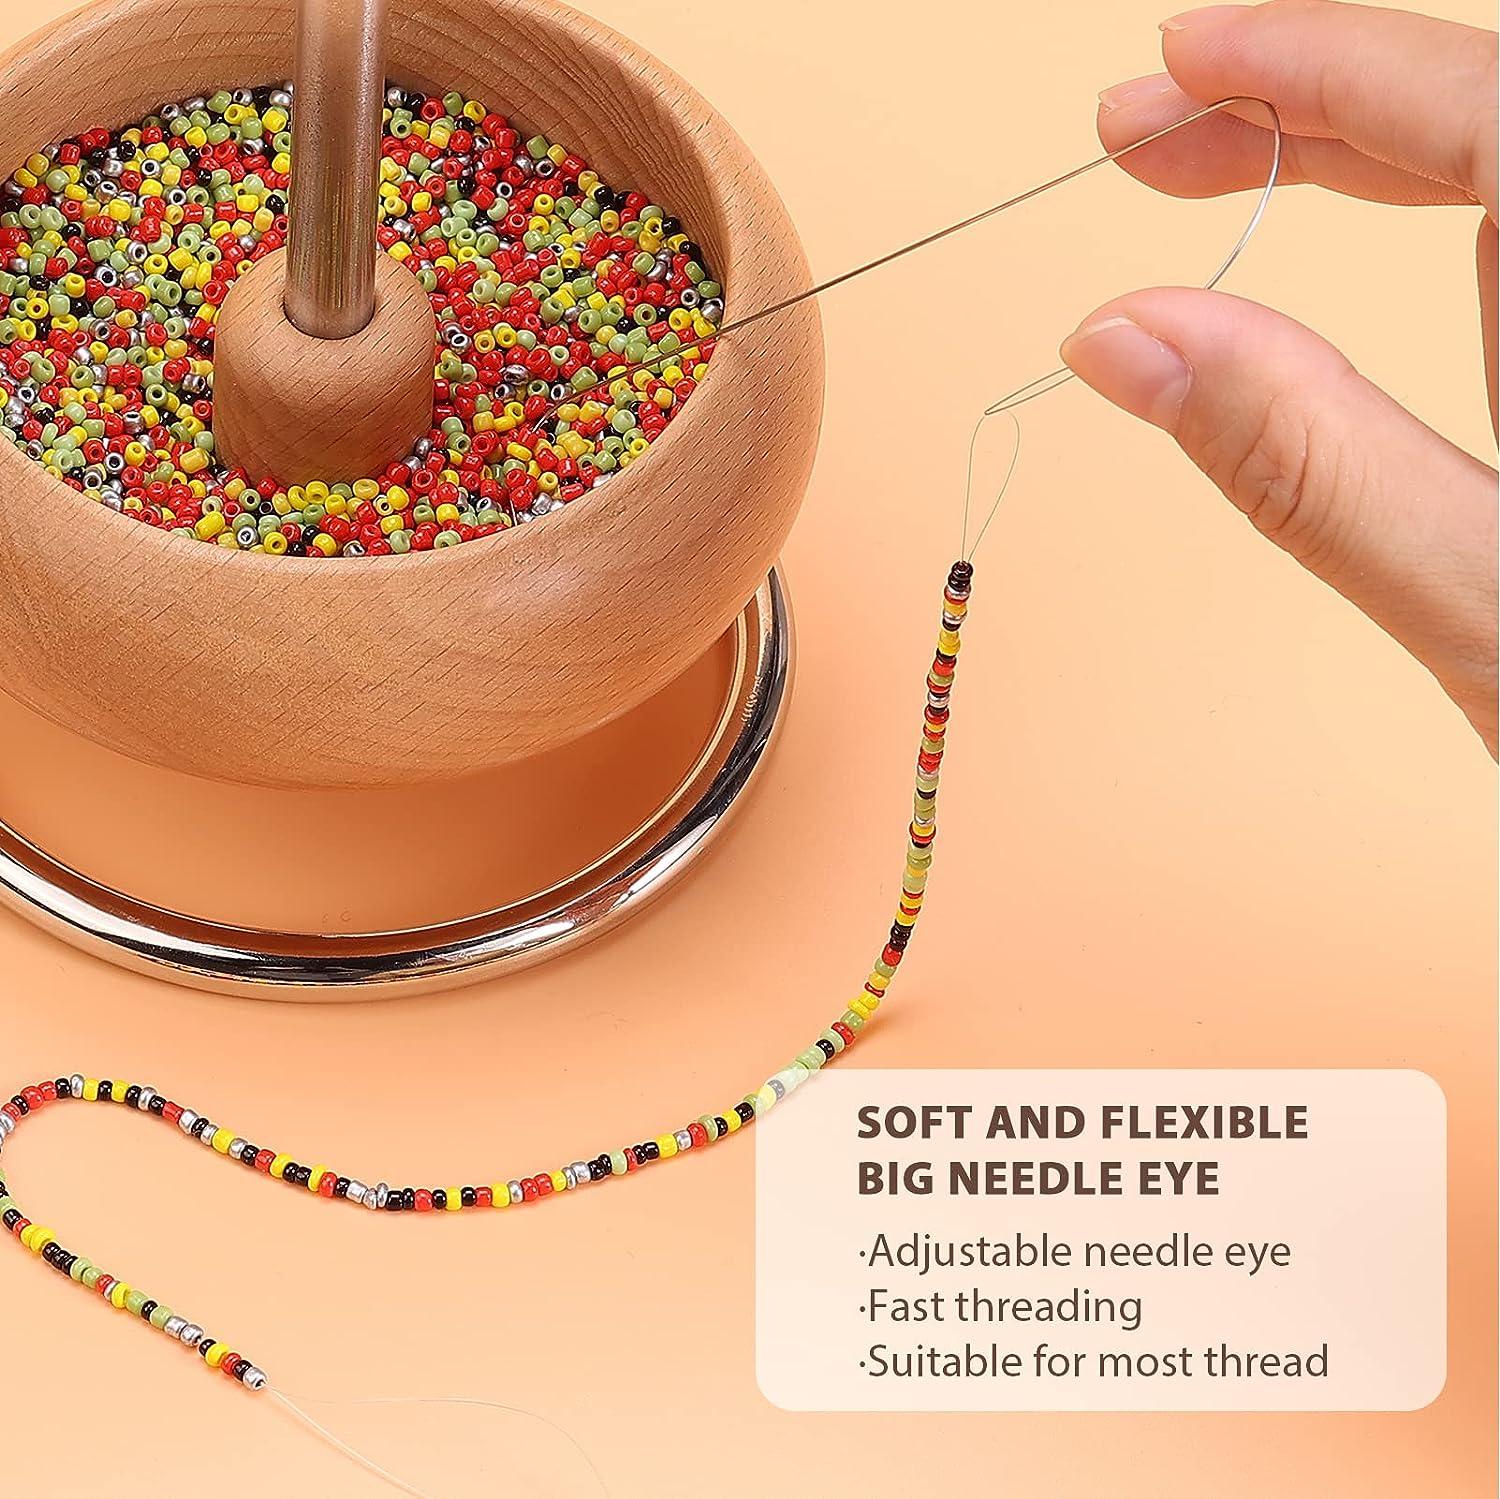 Clay Bead Spinner, Automatic Bead Bowl for Clay Beads, Electric Bead Spinner  for Jewelry Making with Thread and Needles for Bracelets, Necklace  Making(Patented) 